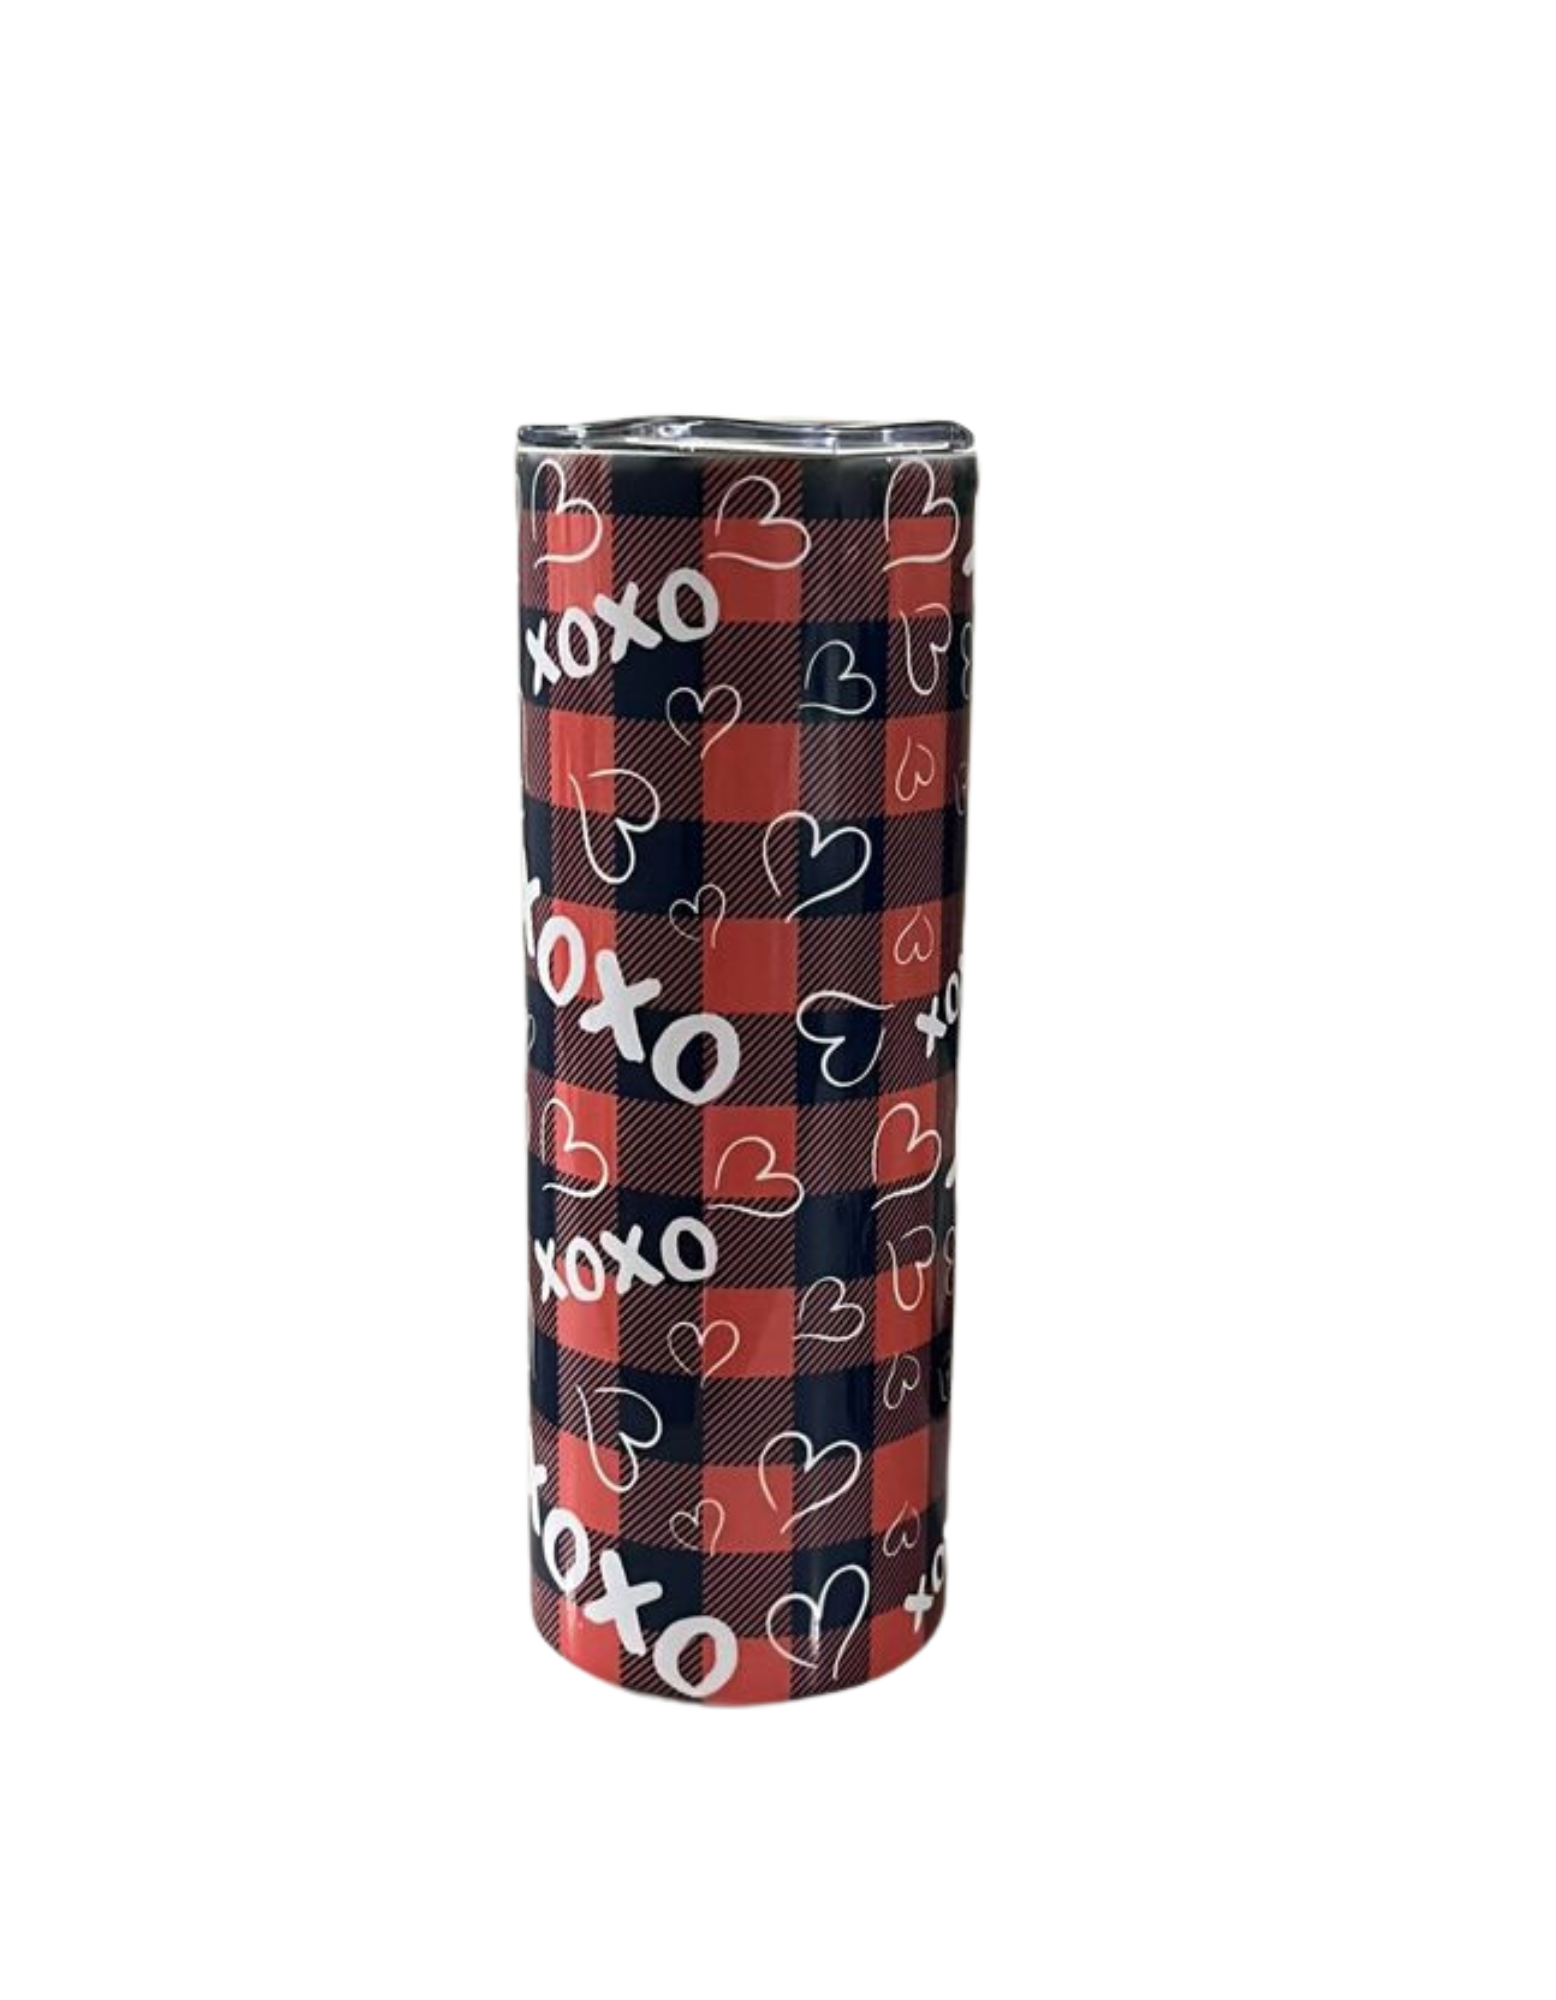 XOXO Valentine's Day Shatterproof Cups